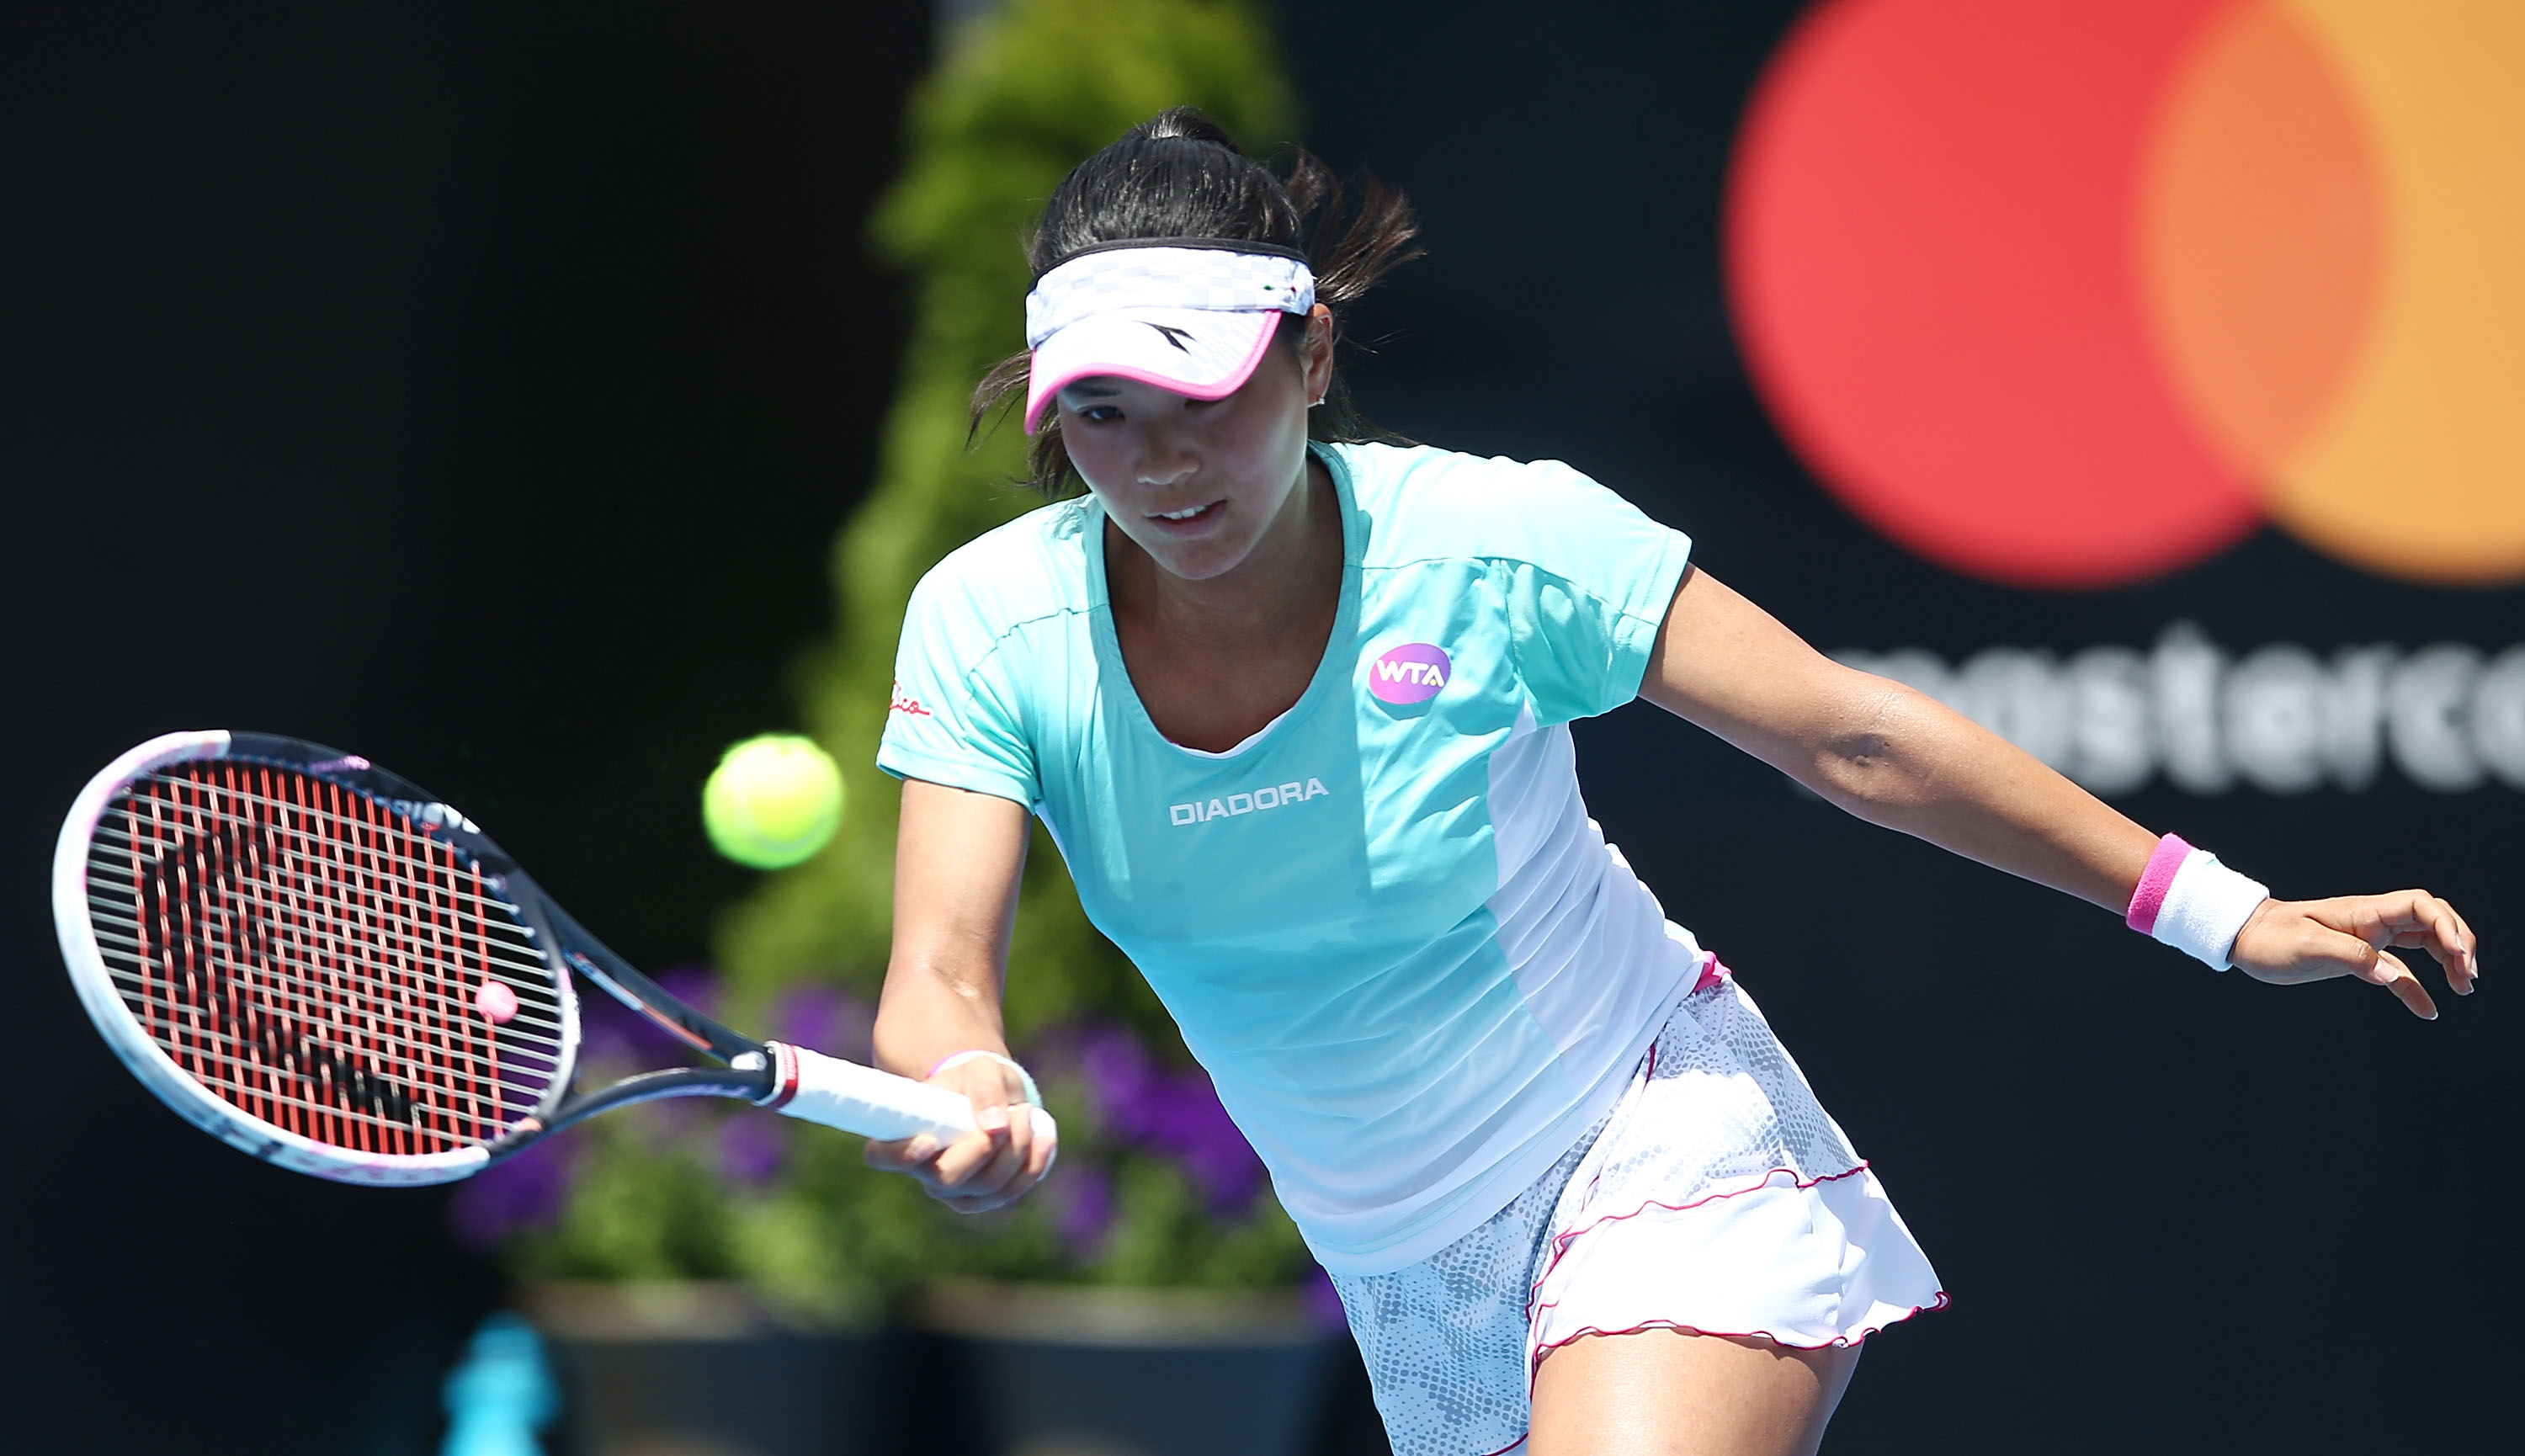 FOCUSED: World No.100 Risa Ozaki lines up a forehand in her clash with Lucie Safarova; Getty Images